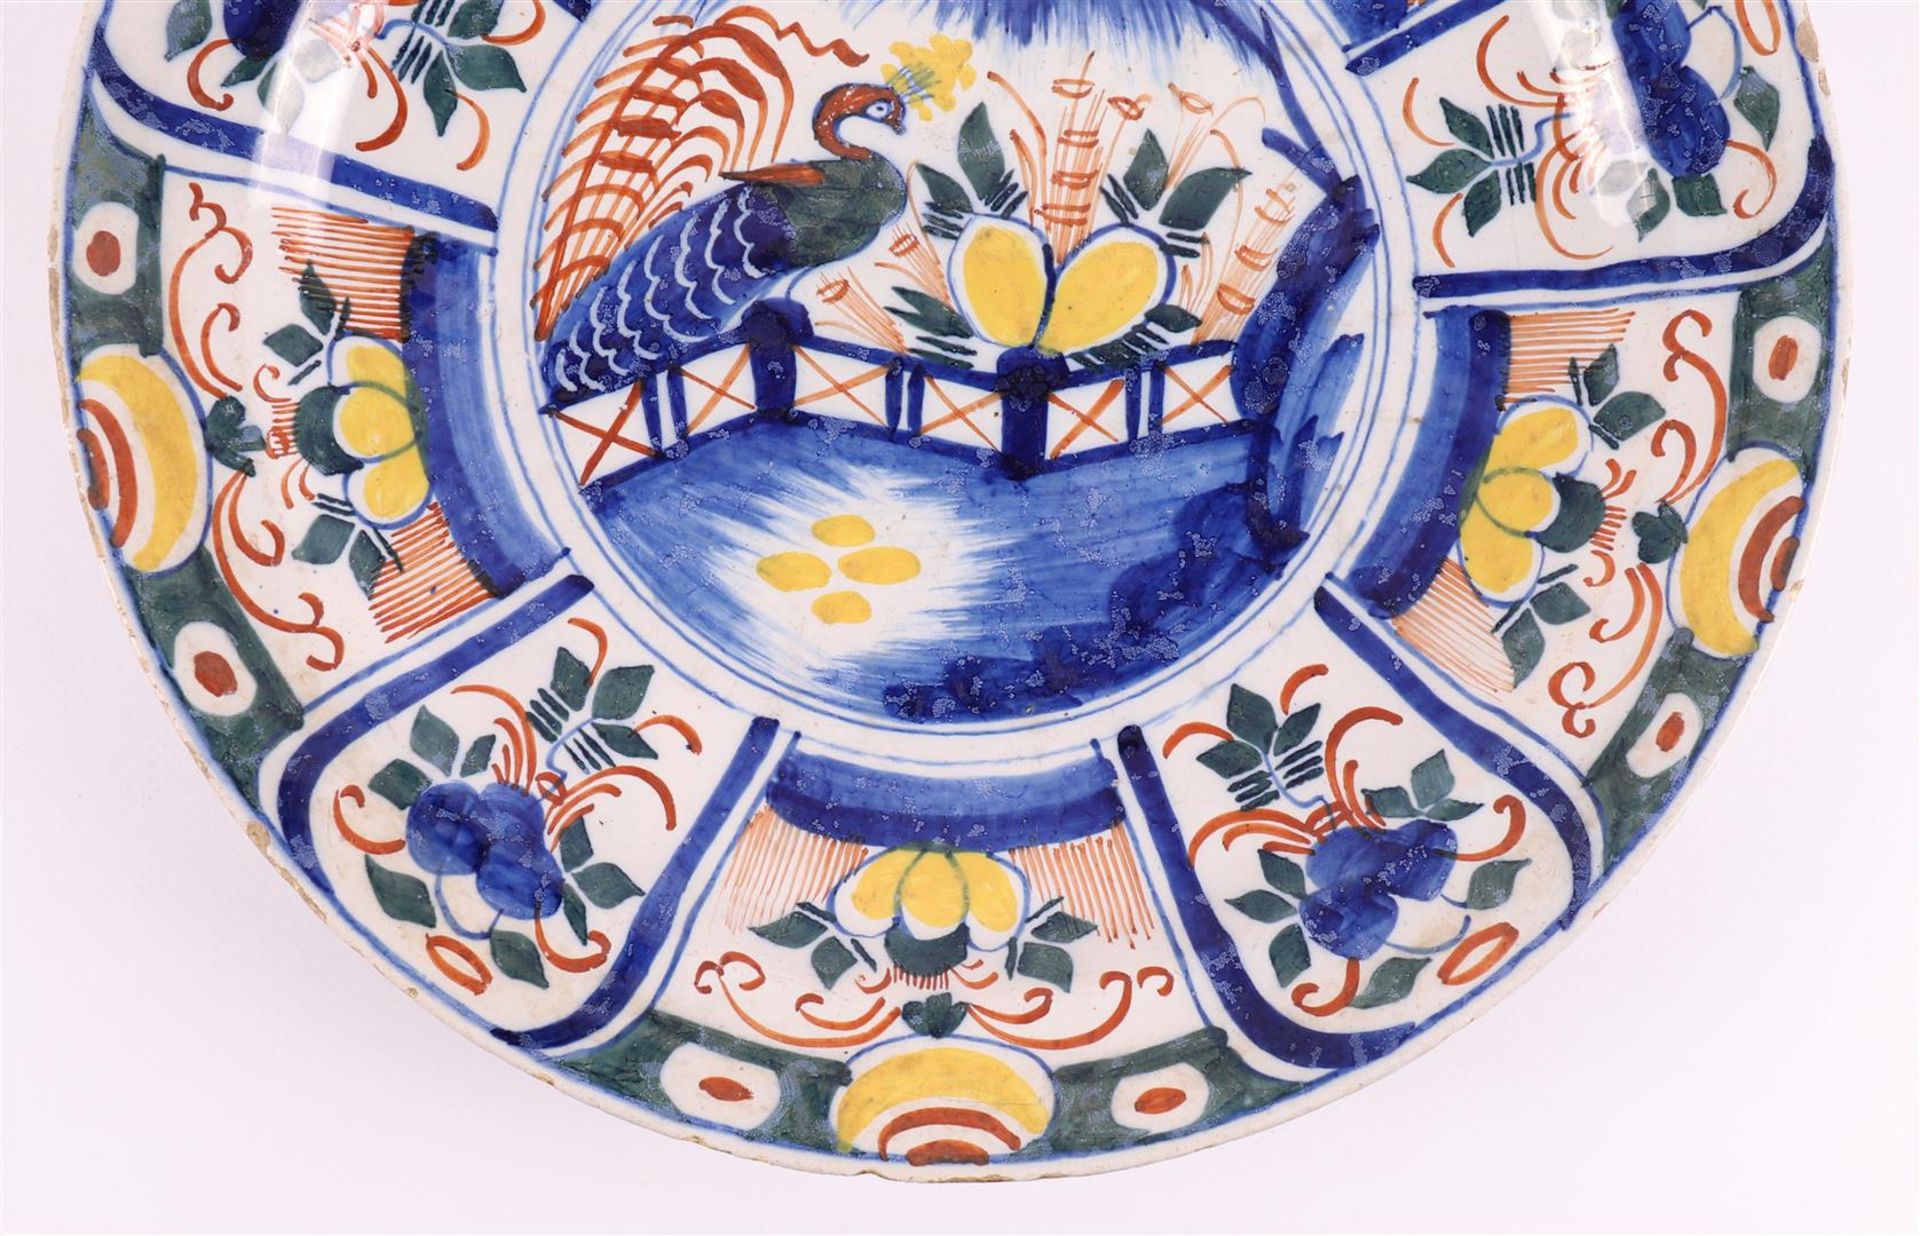 A polychrome Delft earthenware dish, 18th century. - Image 4 of 9